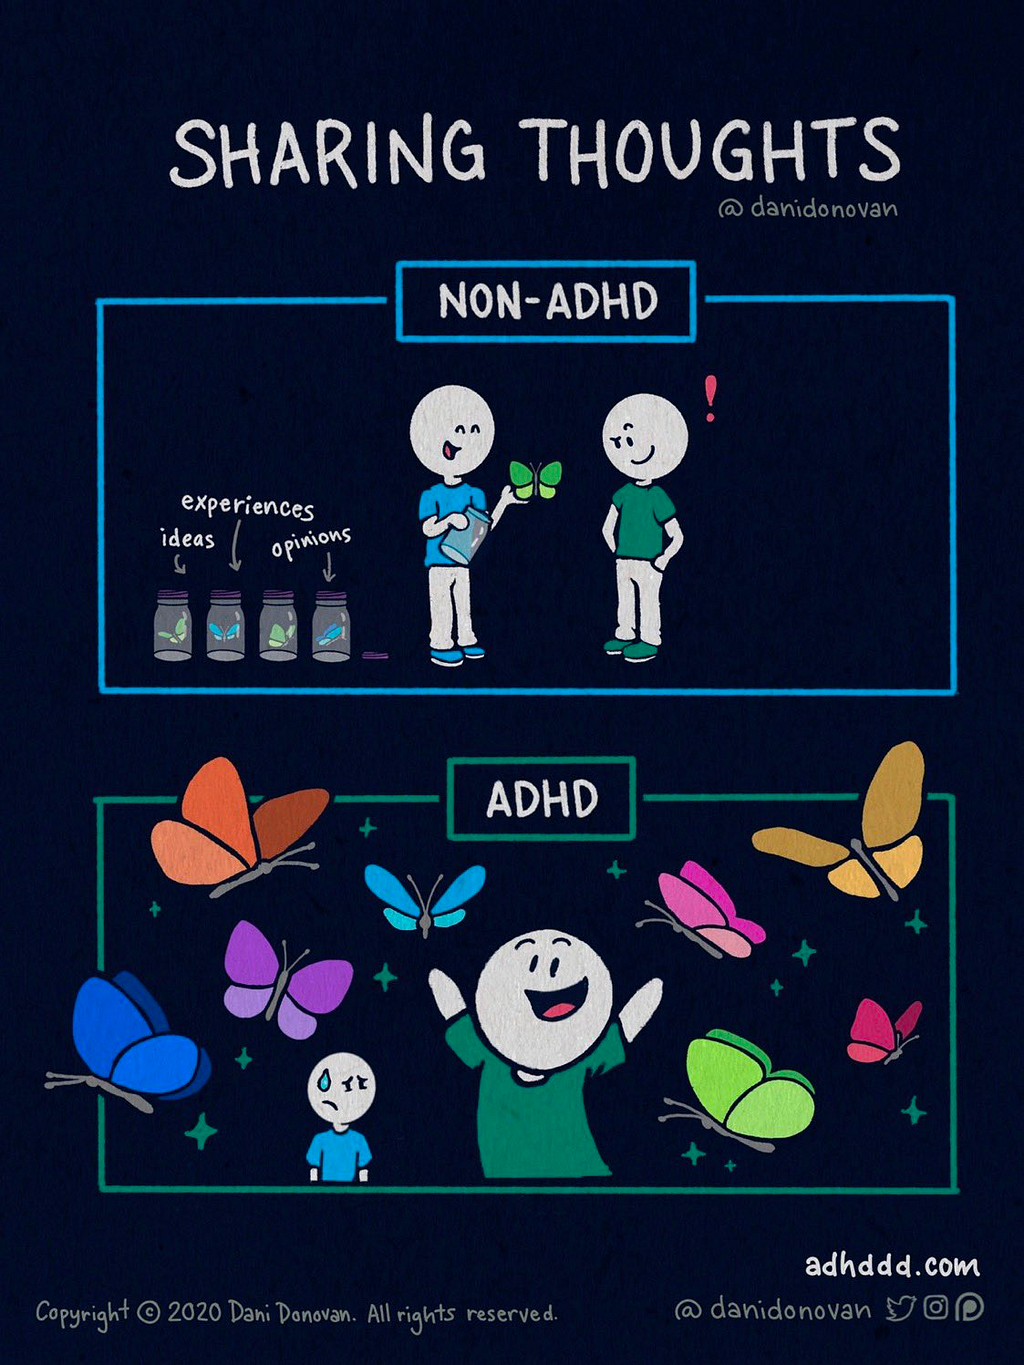 A comic comparing neurotypical and ADHD ways of sharing information, using butterflies as a metaphor.